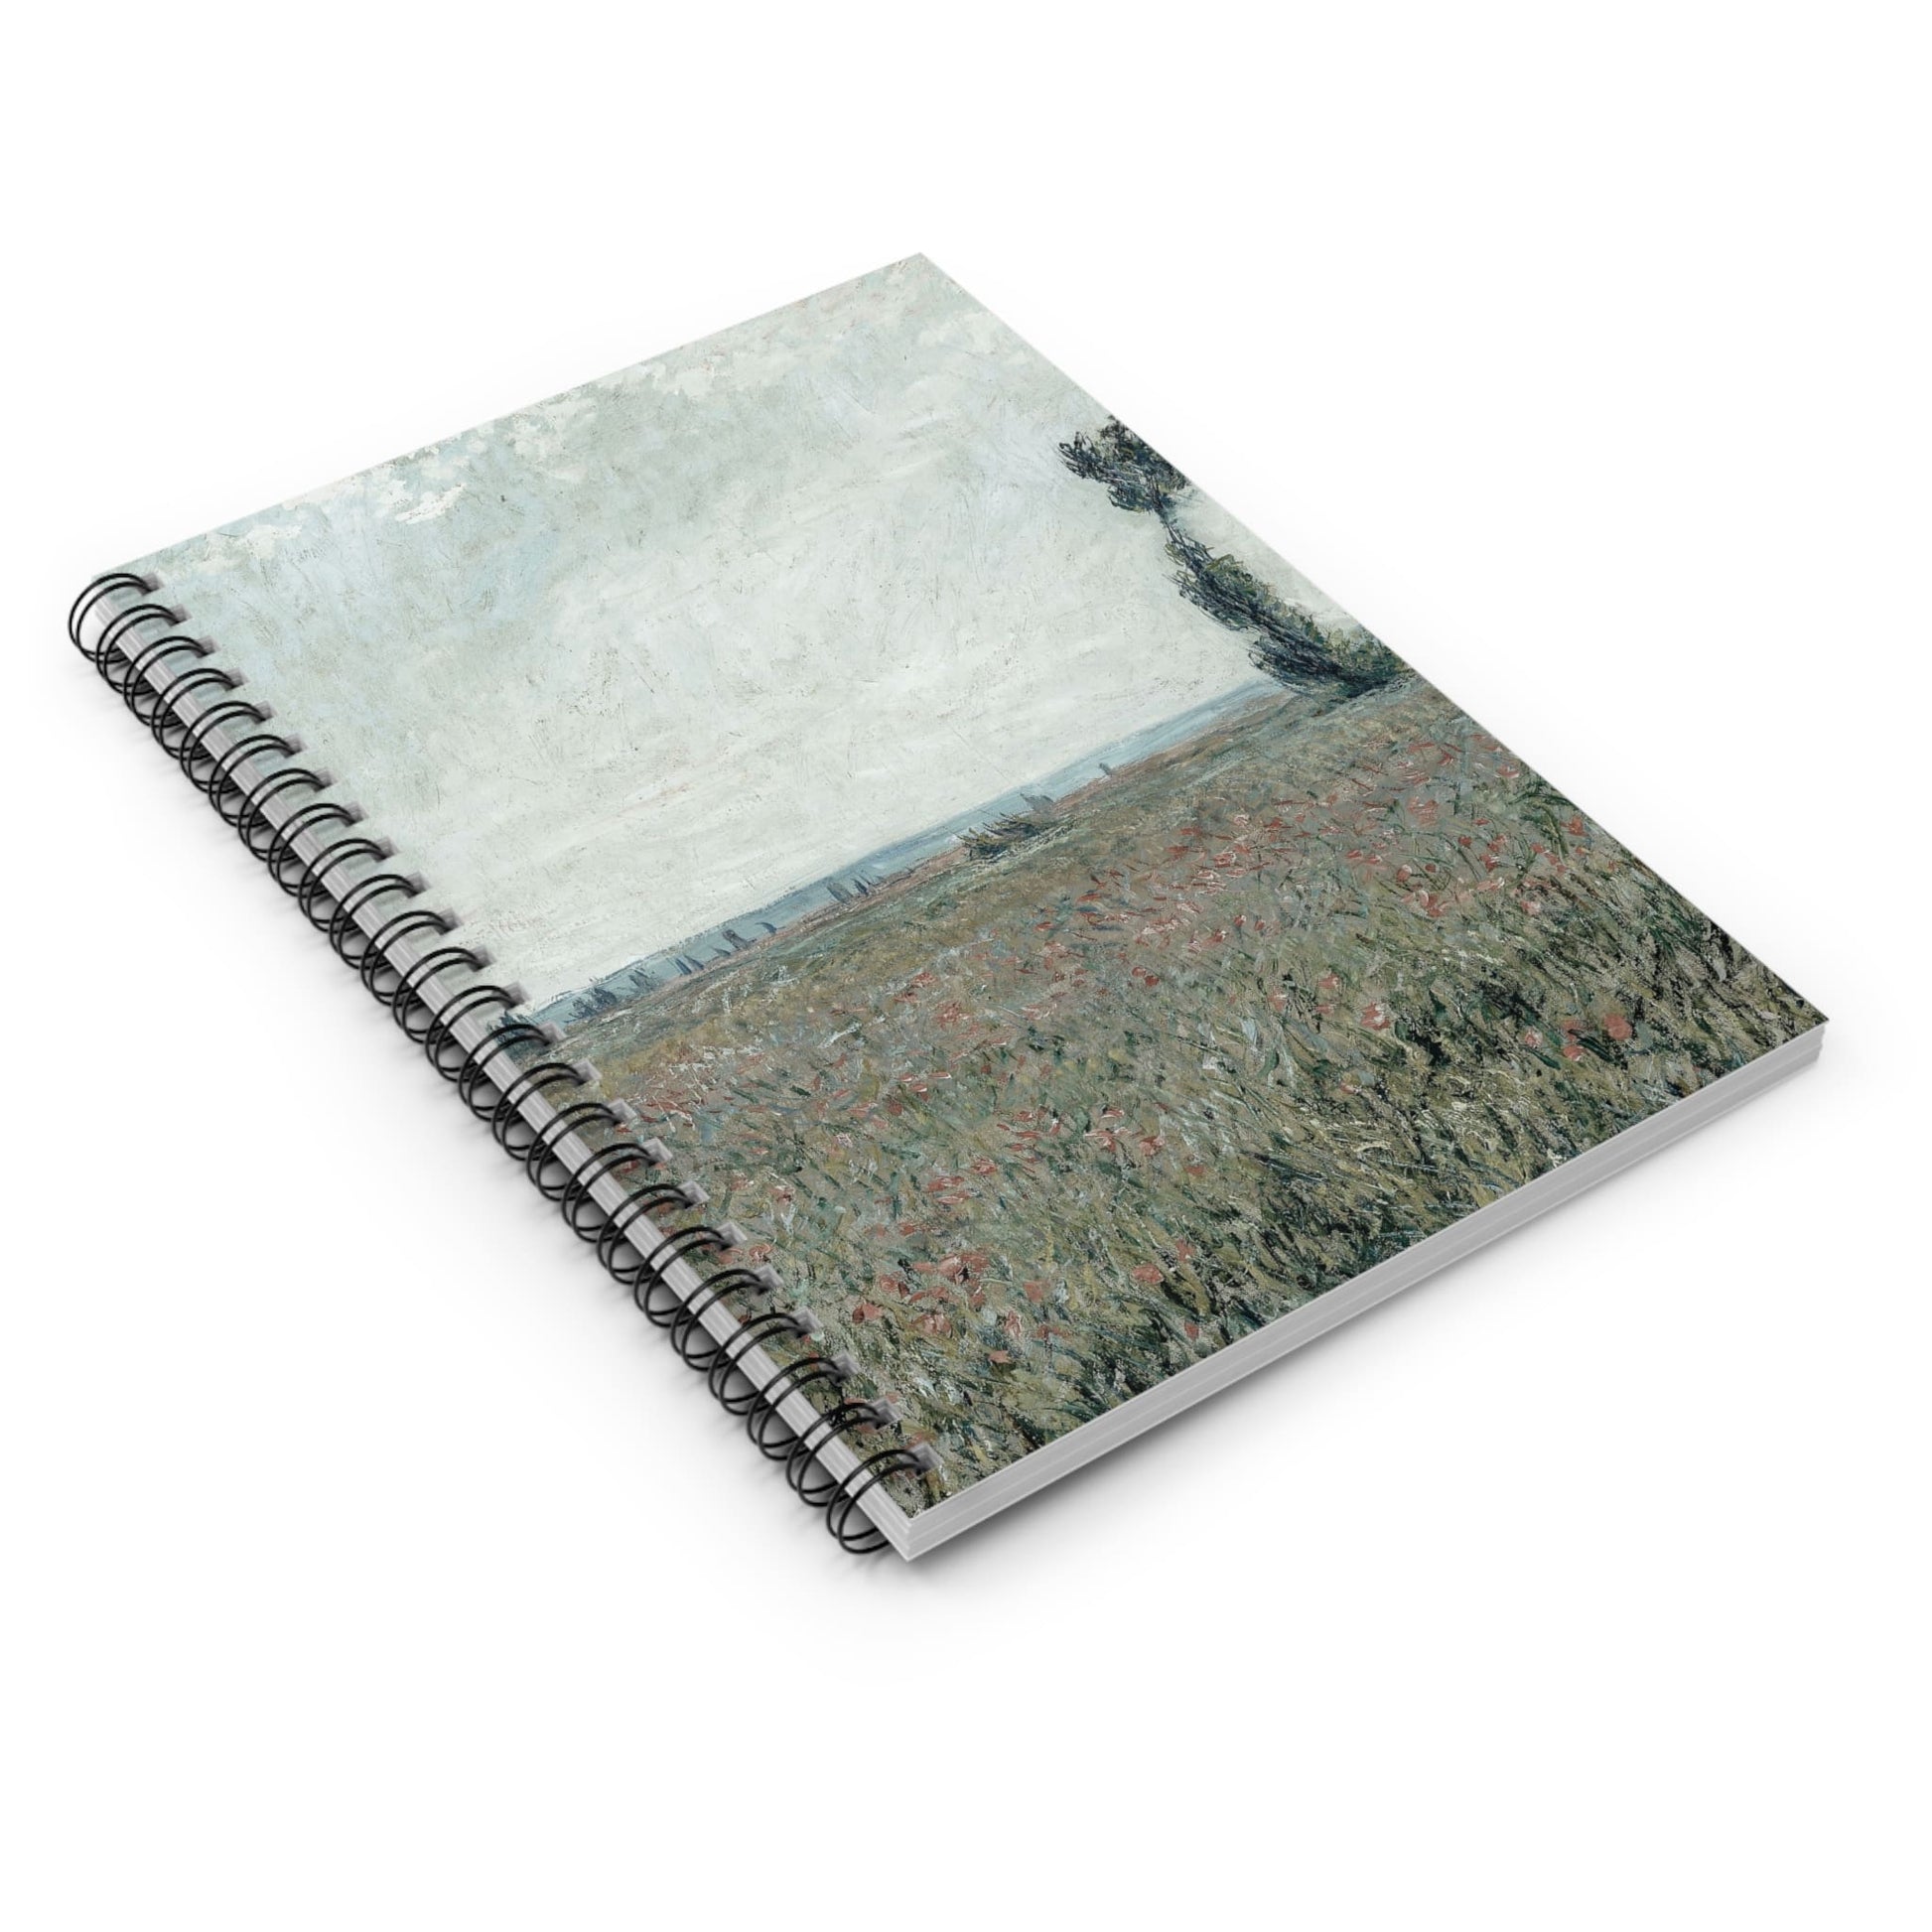 Tranquil Landscape Spiral Notebook Laying Flat on White Surface